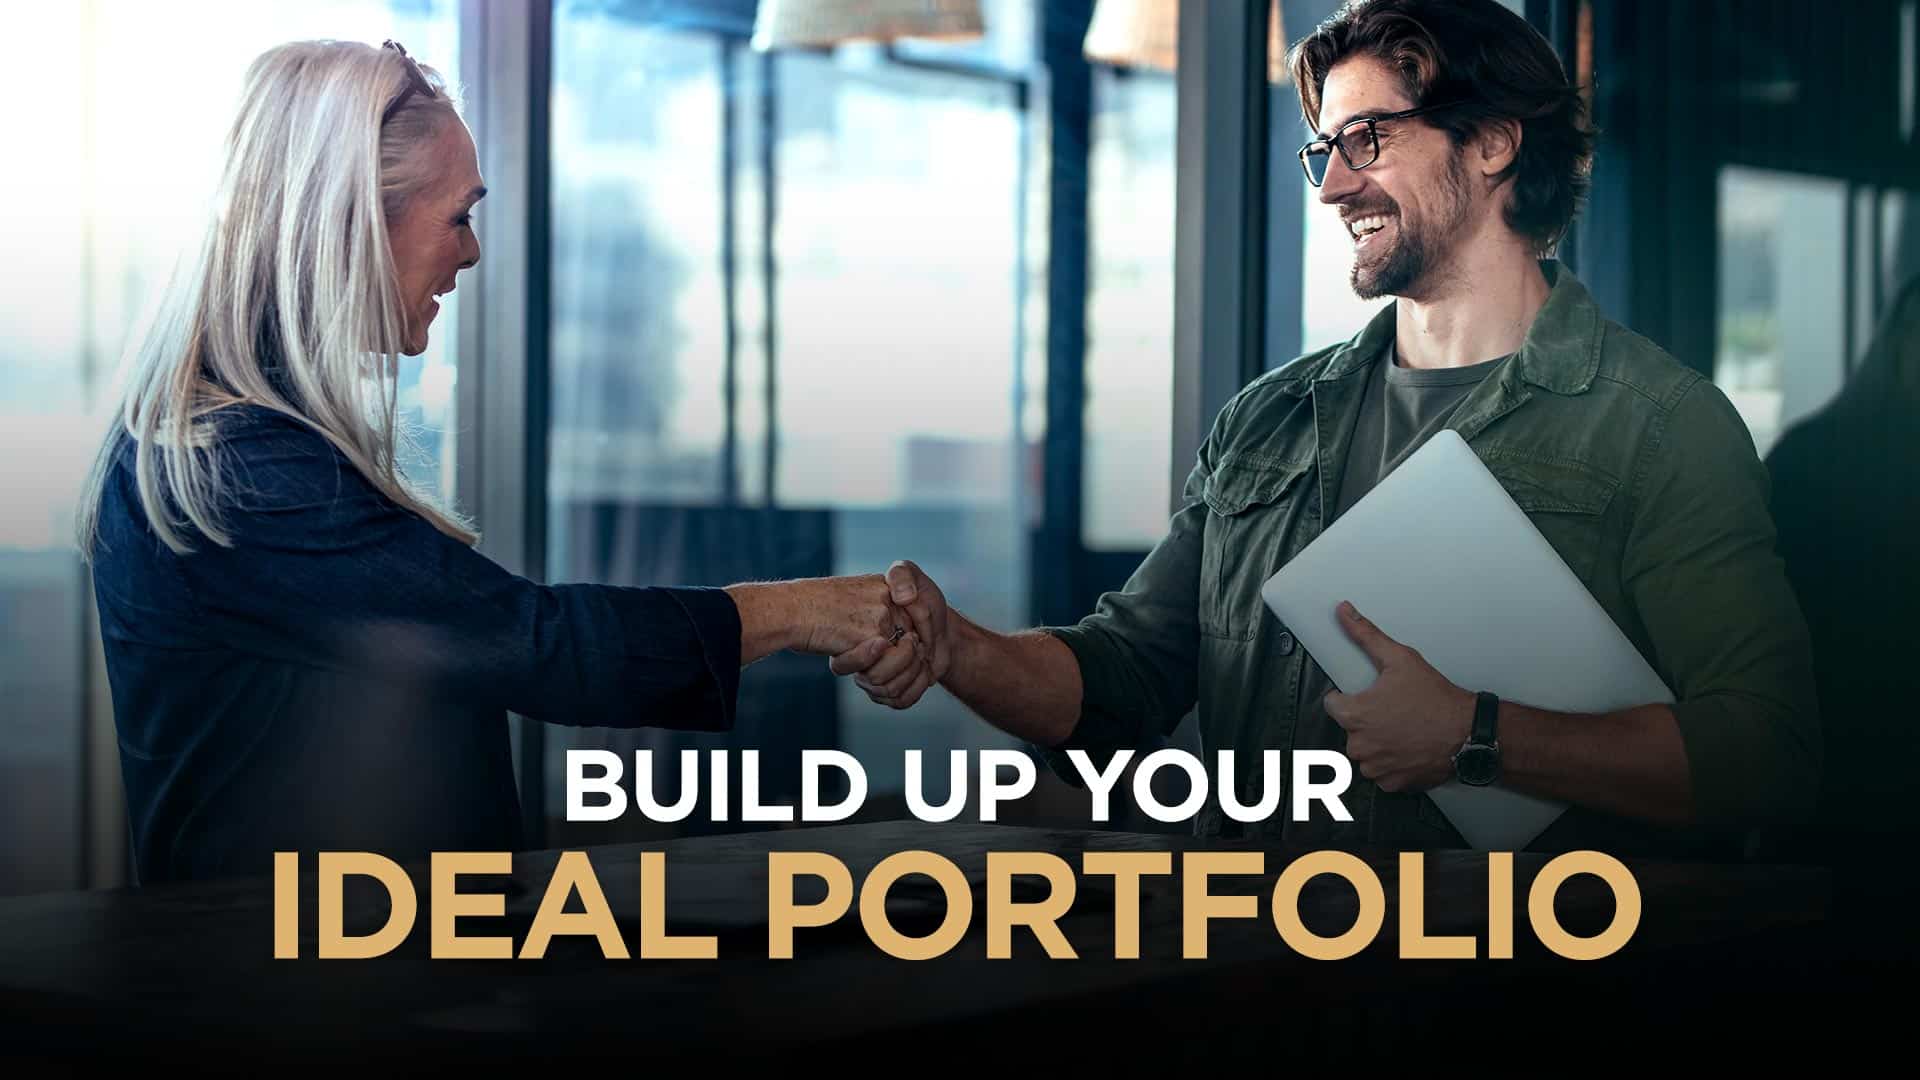 7T-7-Types-of-How-to-Invest-And-Build-Up-Your-Ideal-Portfolio